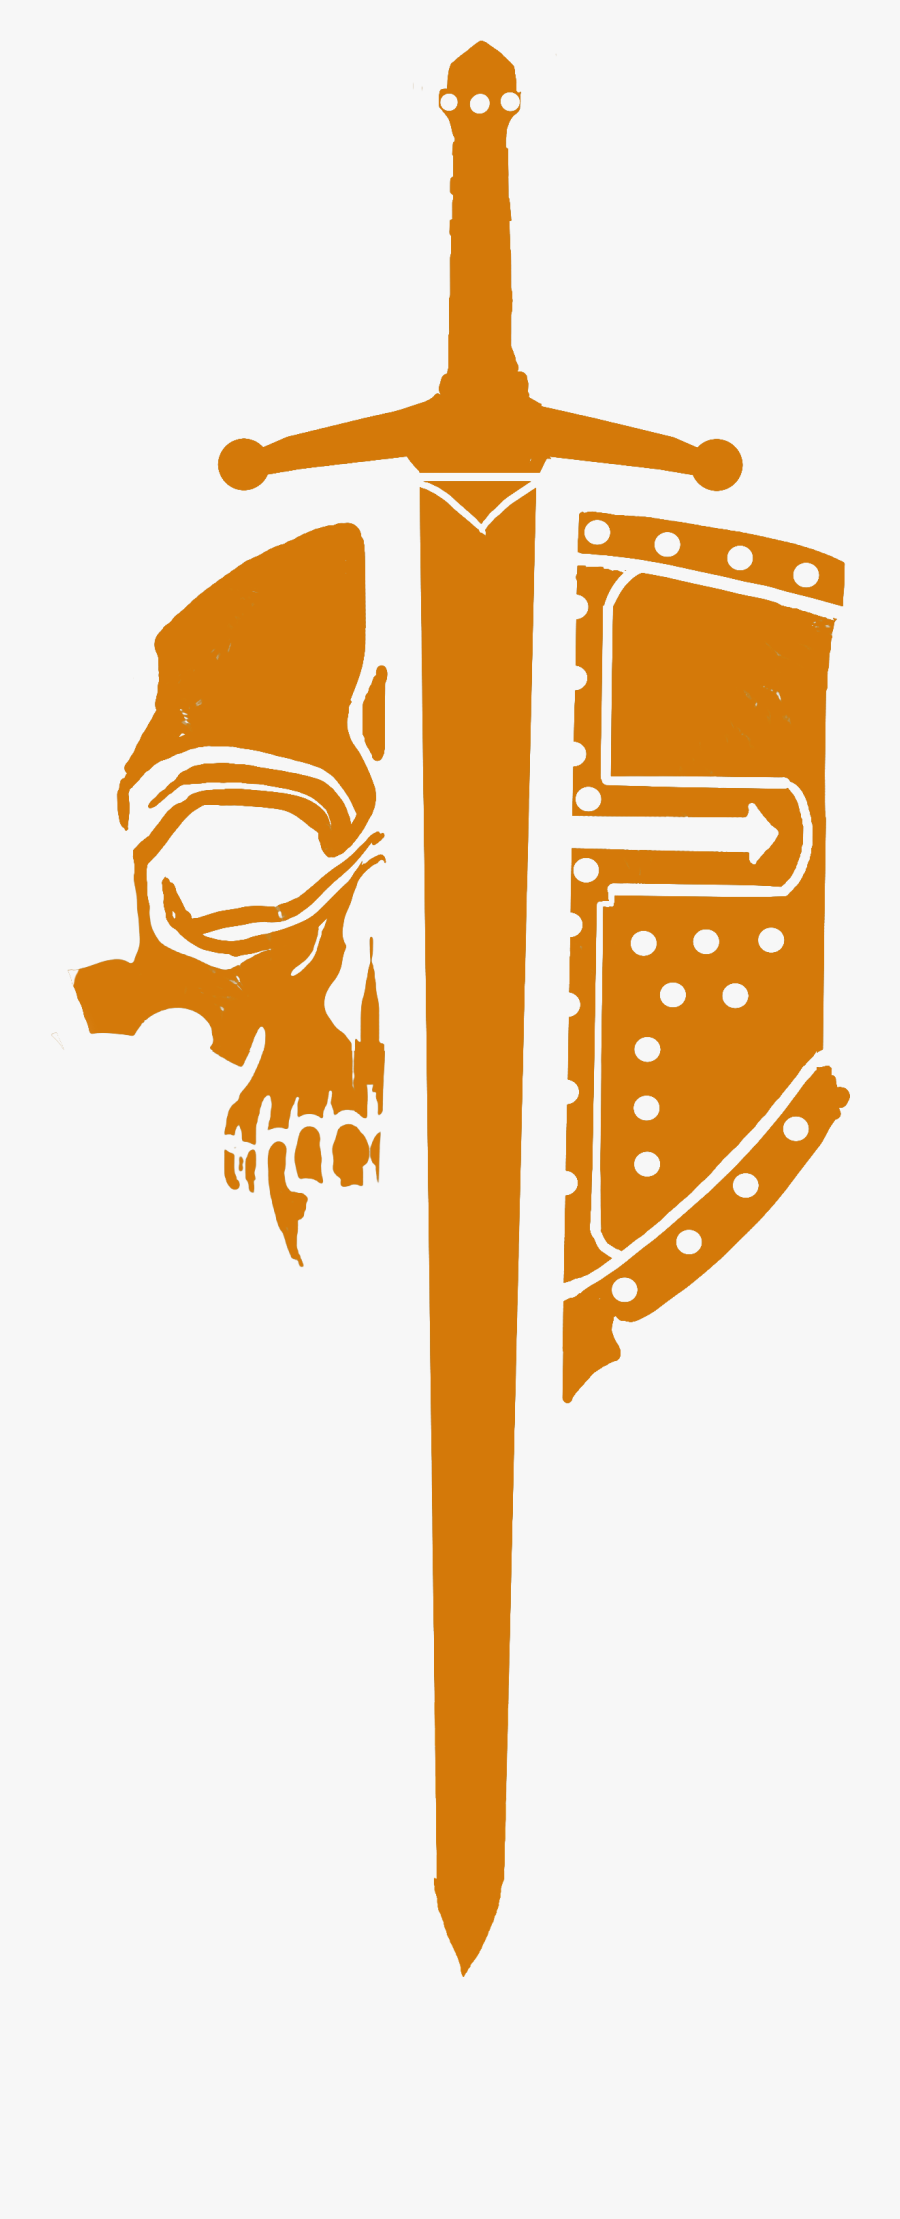 Knight Symbol For Honor - Knight For Honor Symbol, Transparent Clipart